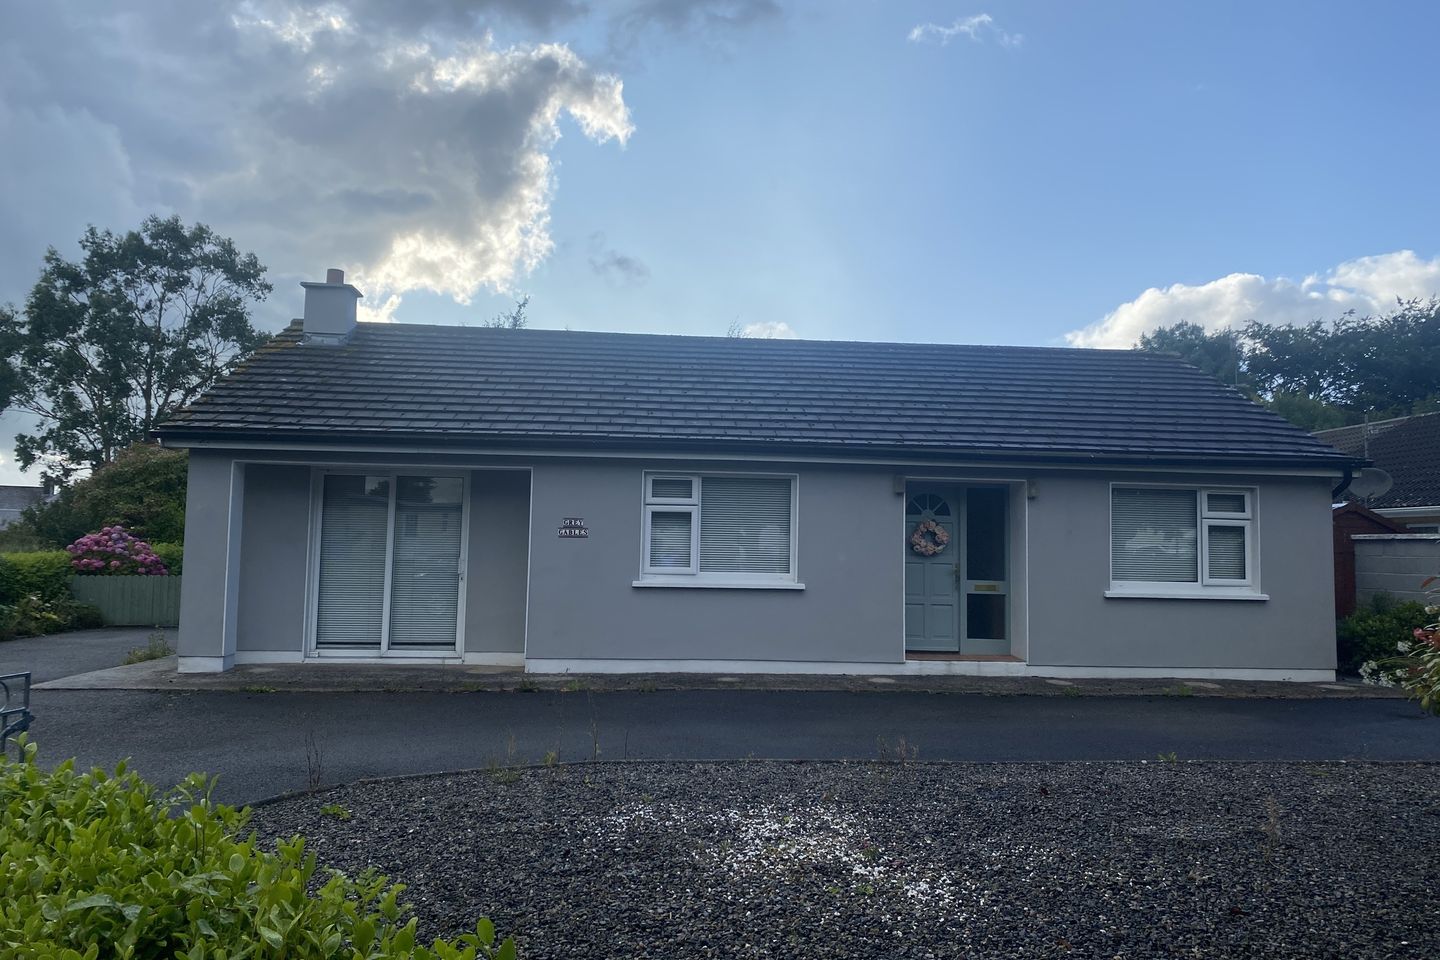 Parks Road, Lismore, Co. Waterford, P51NR12